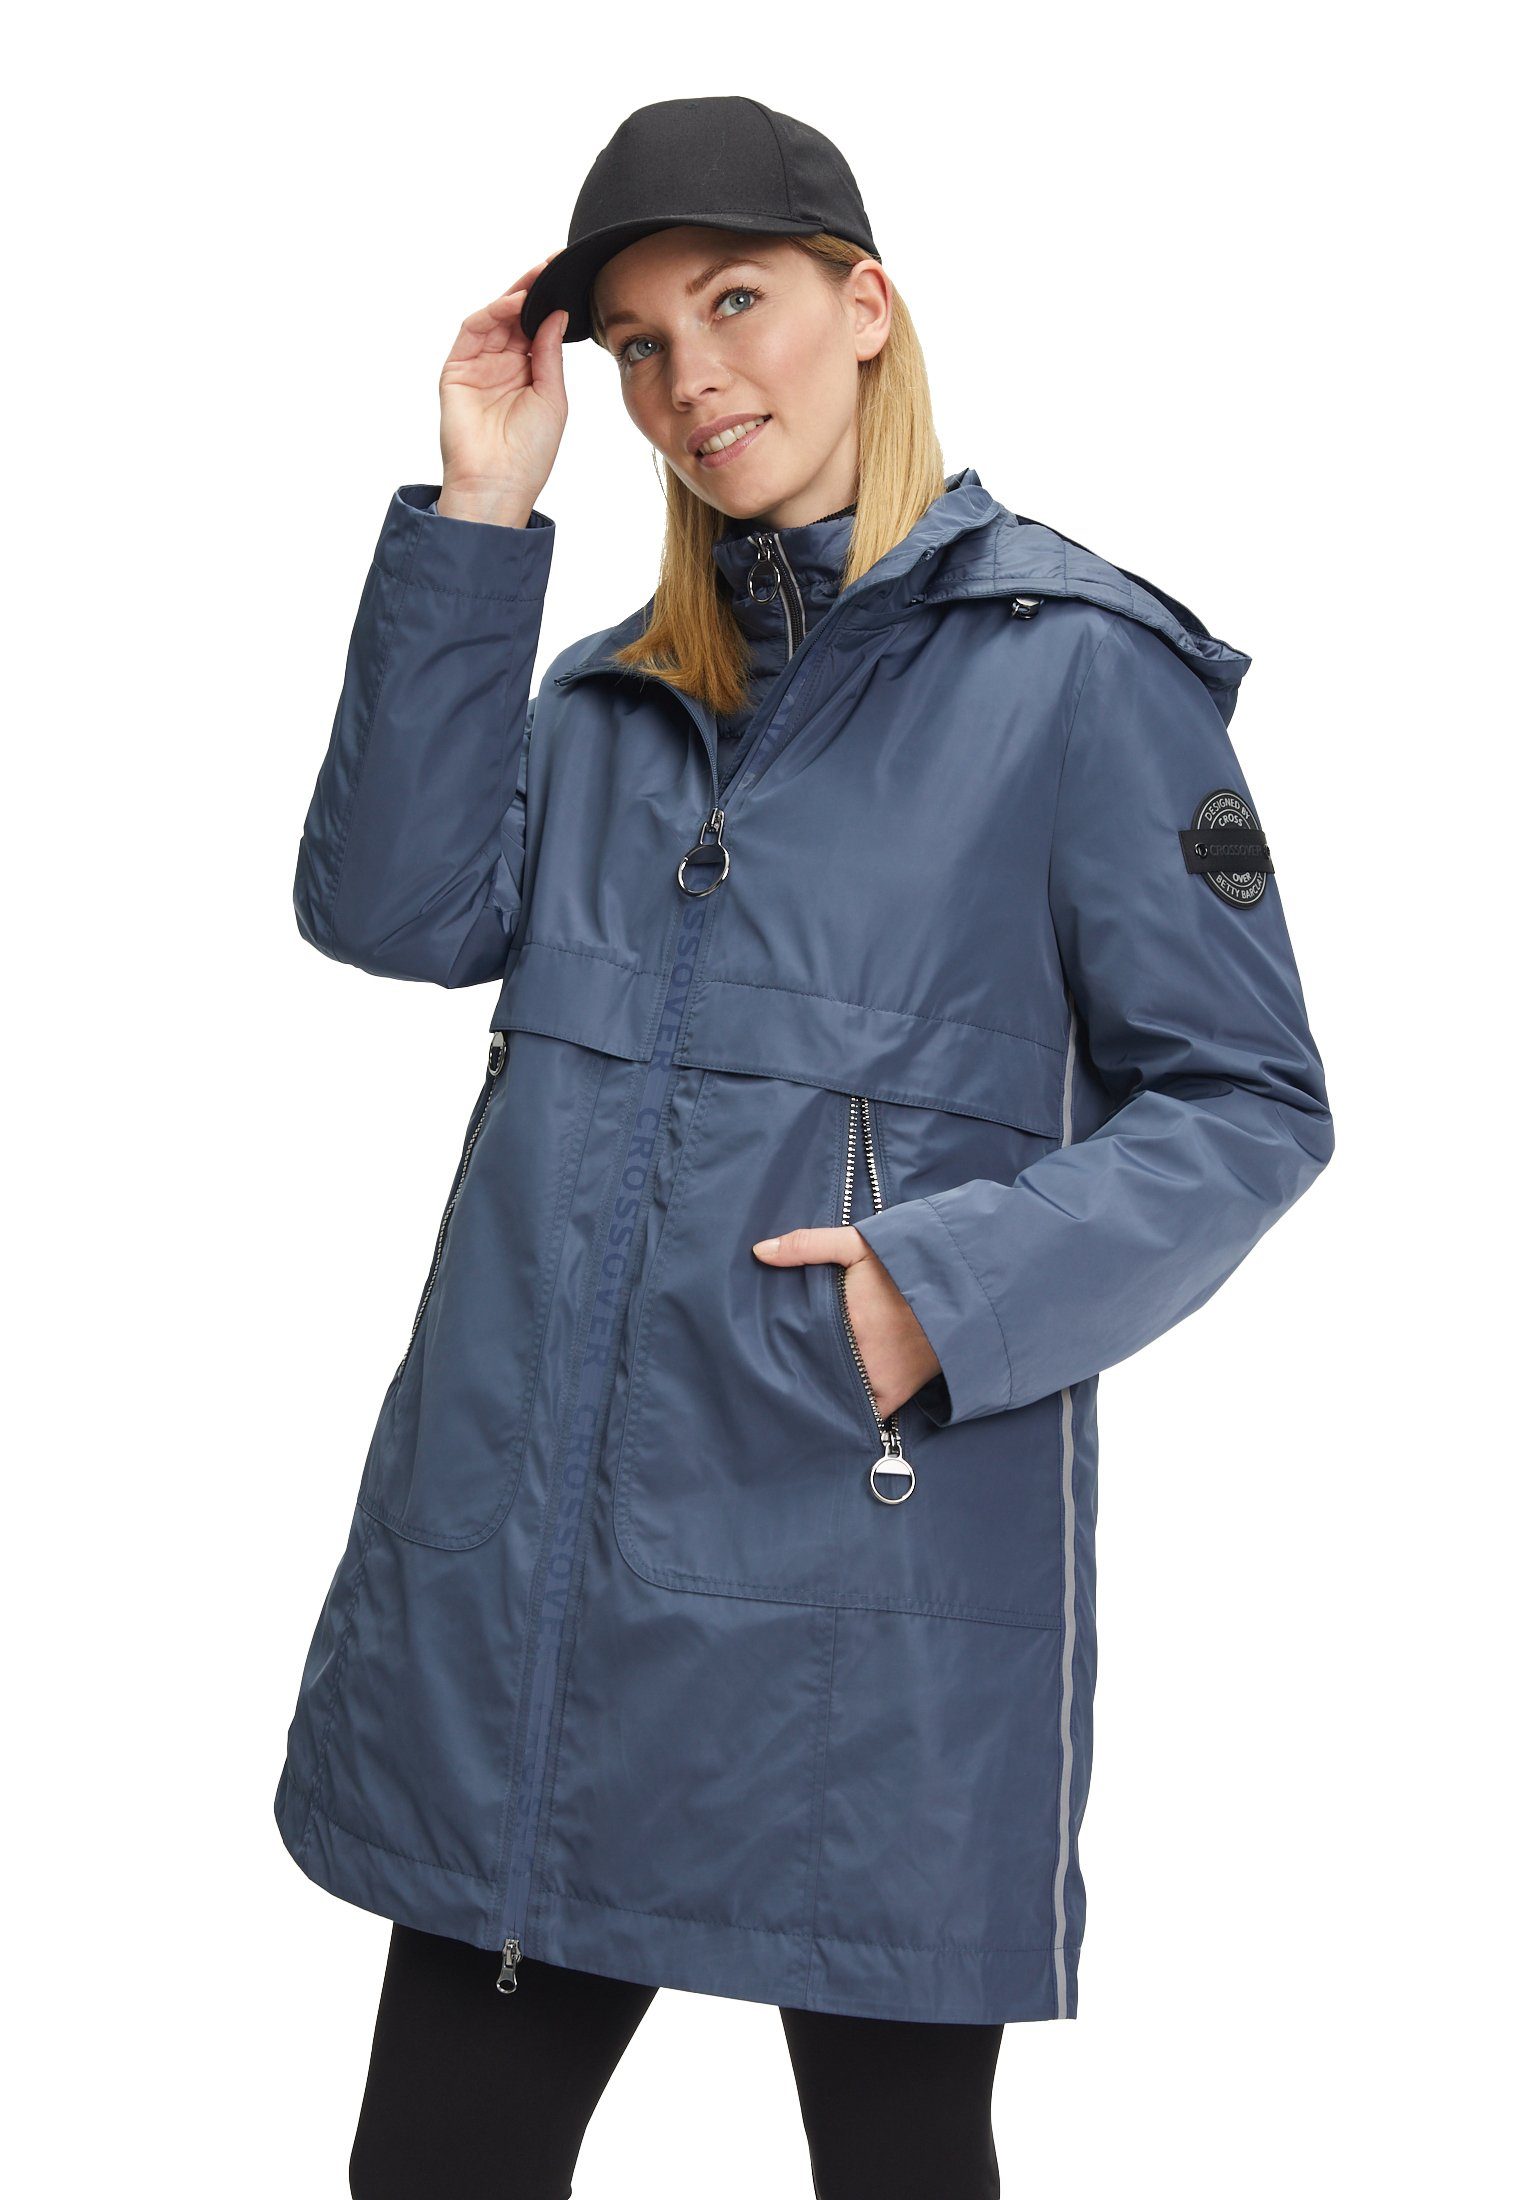 Betty Funktion Parka Blaugrau Barclay mit Materialmix